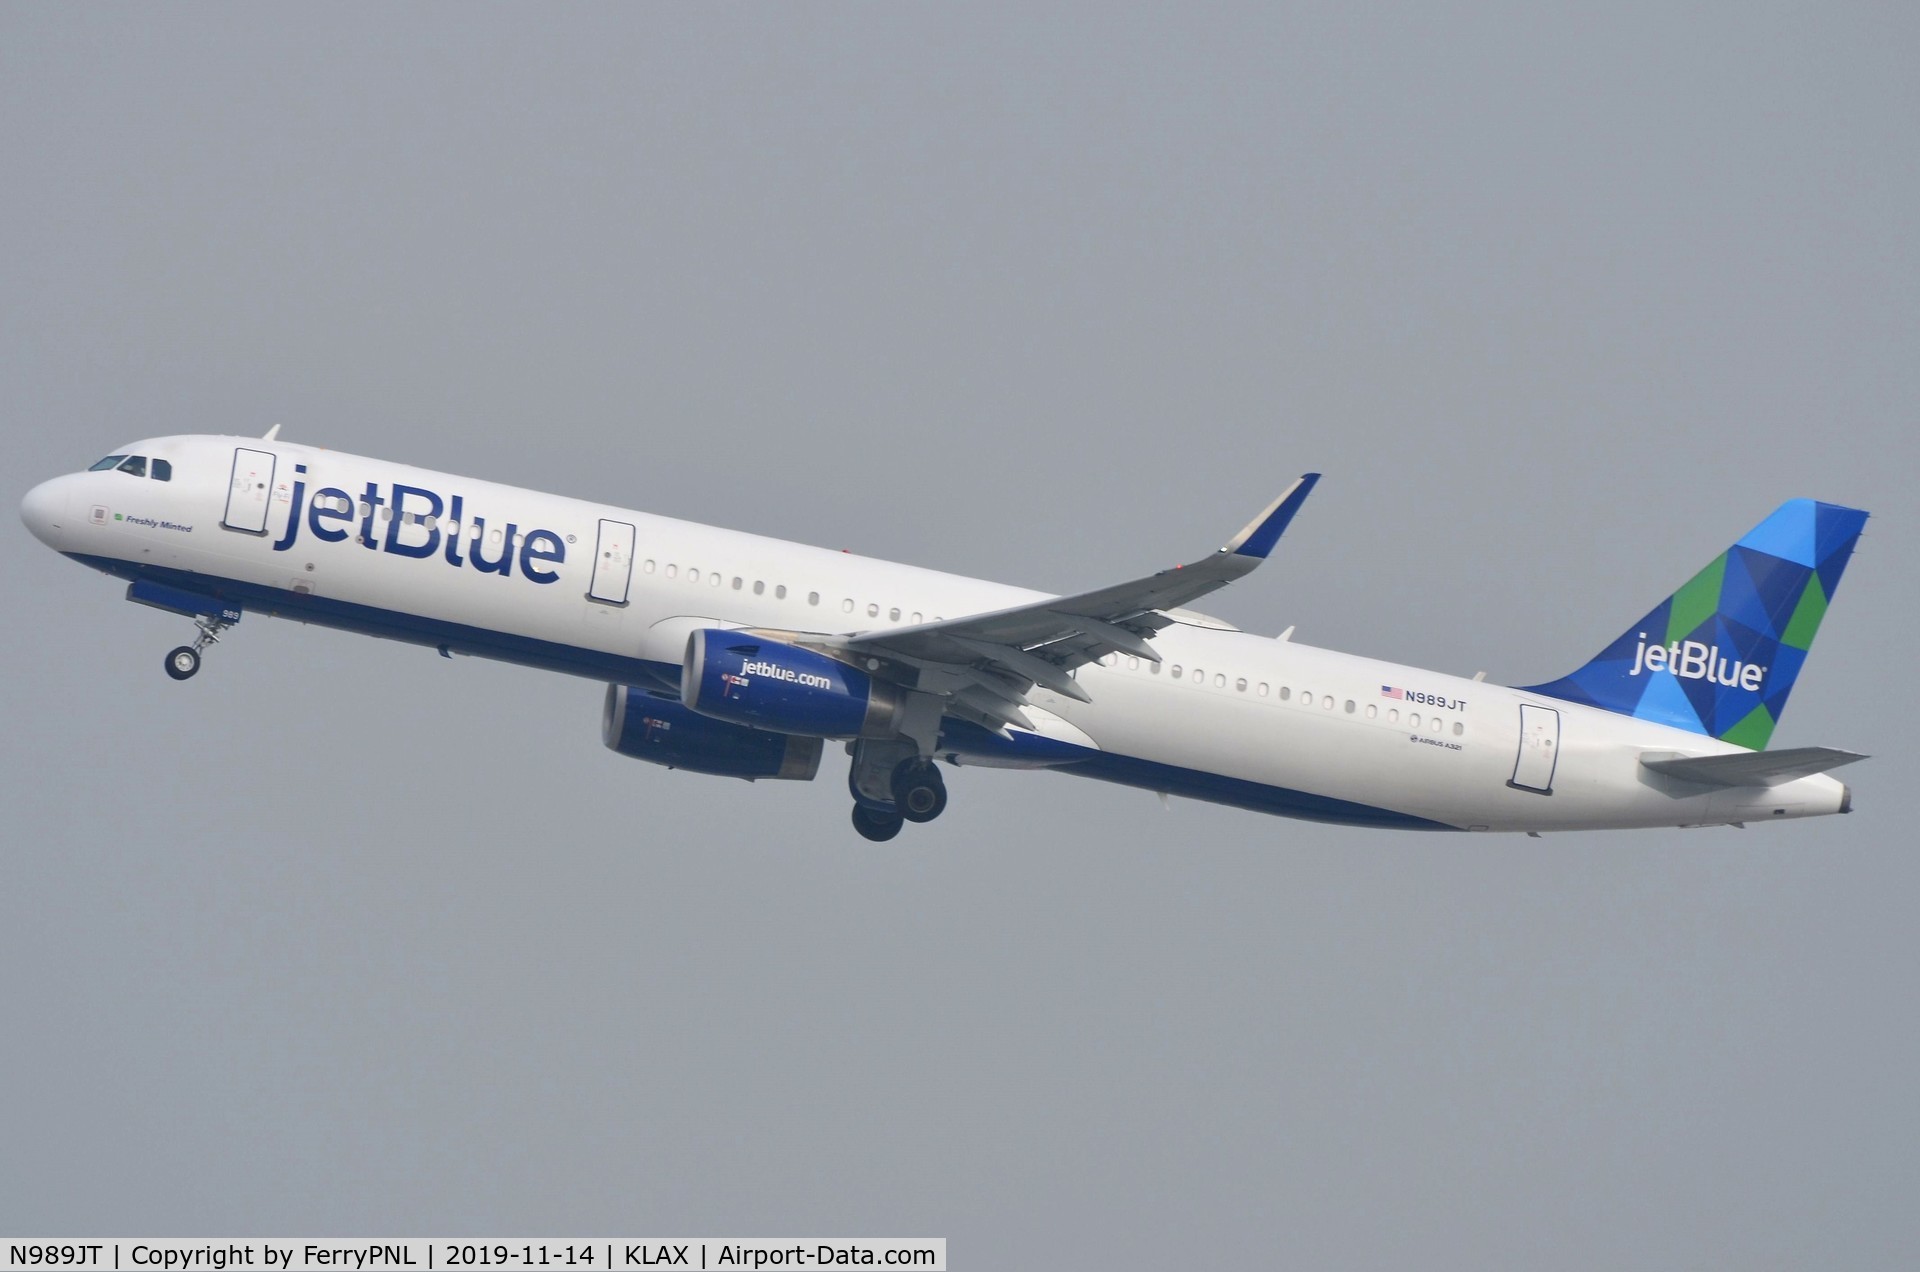 N989JT, 2017 Airbus A321-231 C/N 7924, Departure of JetBlue A321